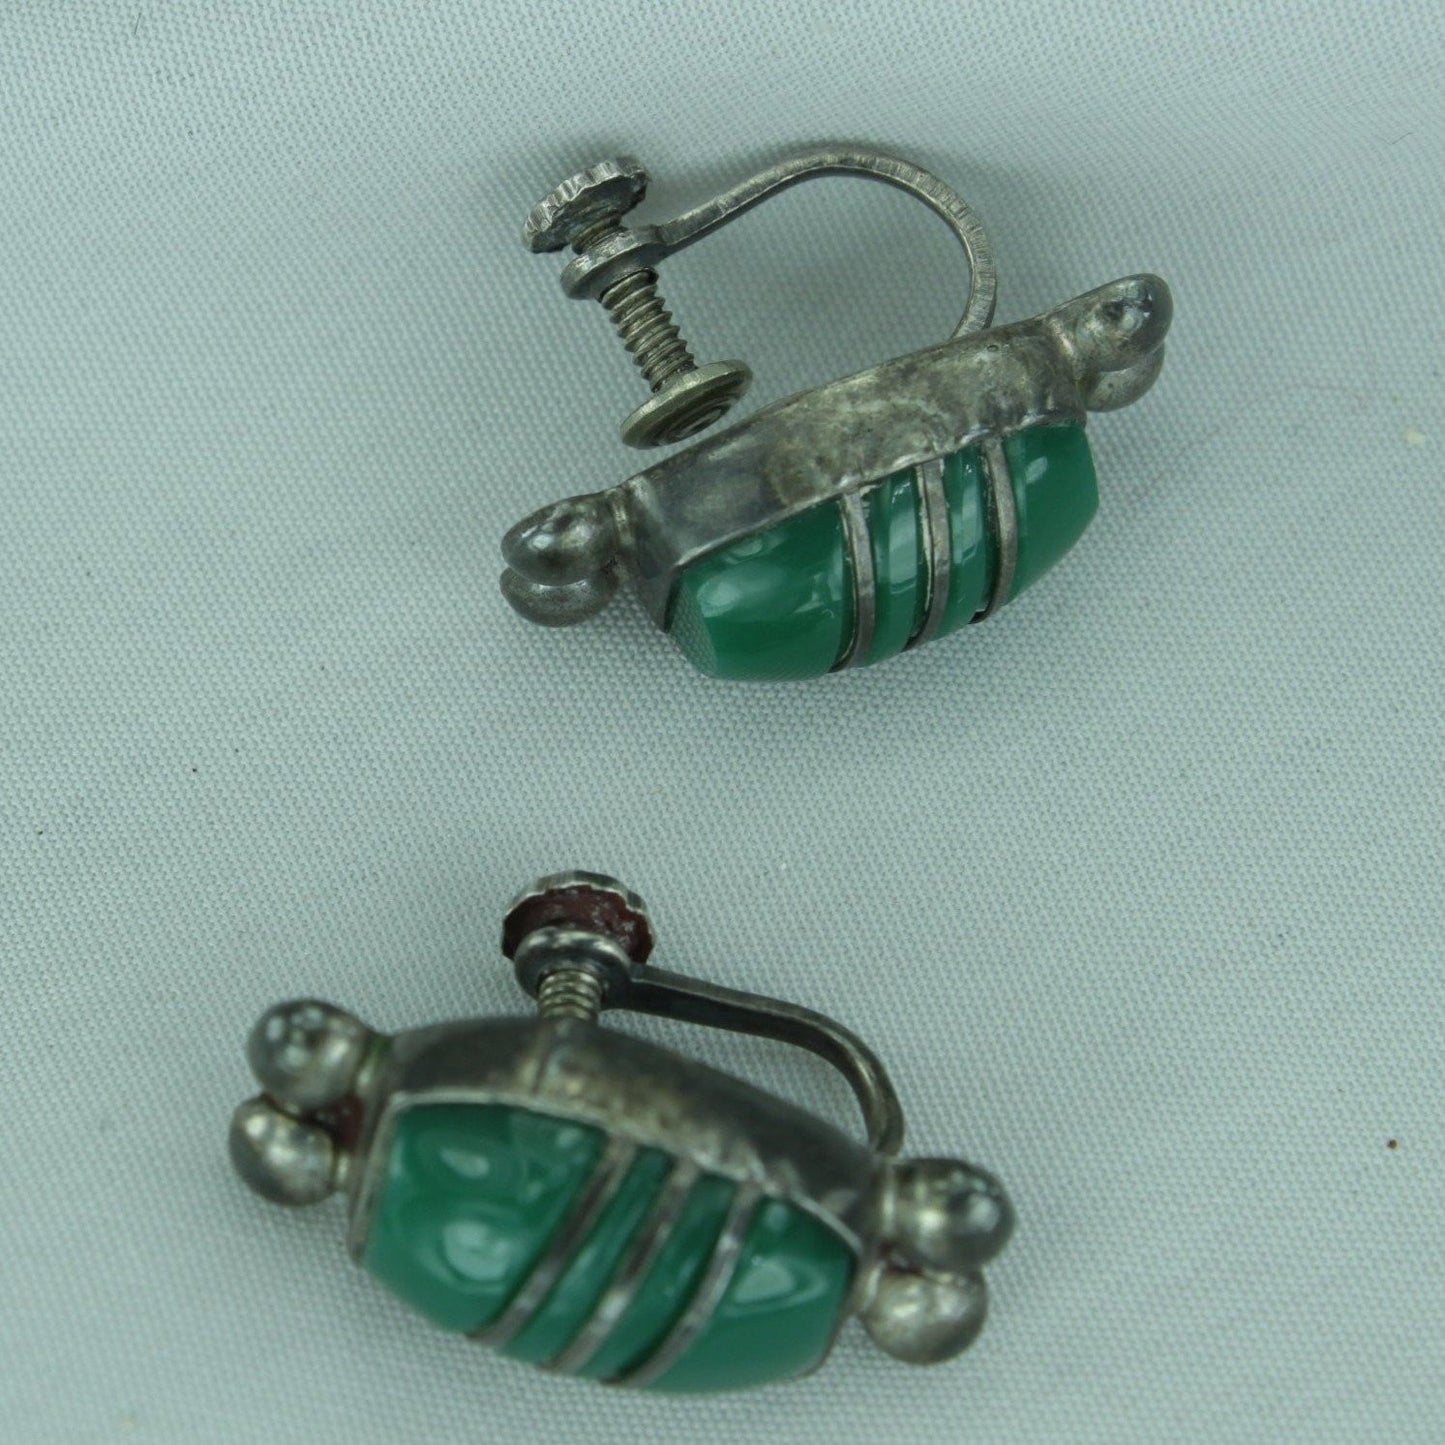 Vintage 1940s Earrings Sterling Green Stone Mexico Screw Finding 925